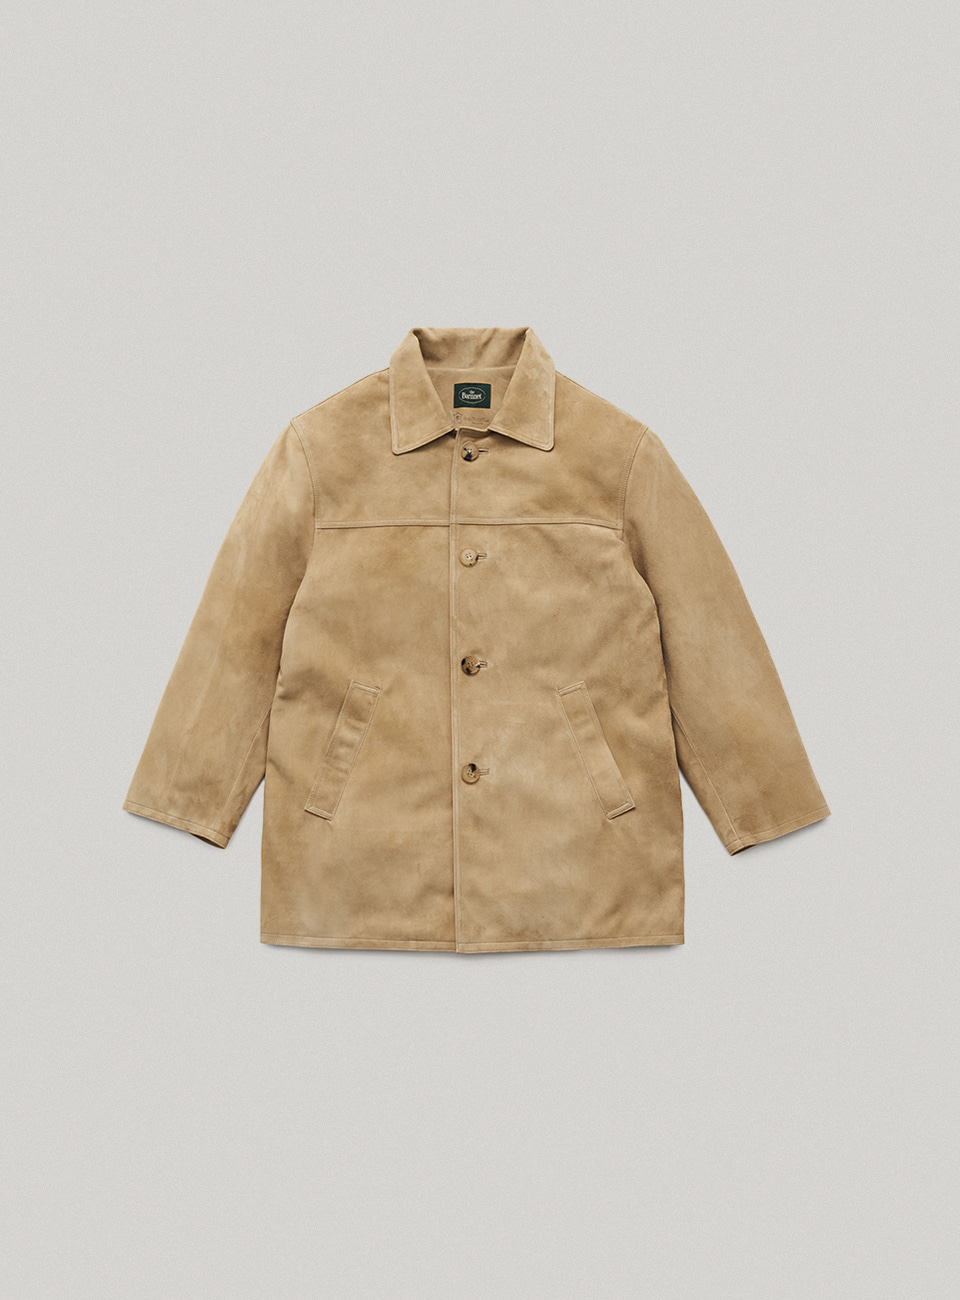 Rond Suede Jacket by ONLY FLANK S.R.L